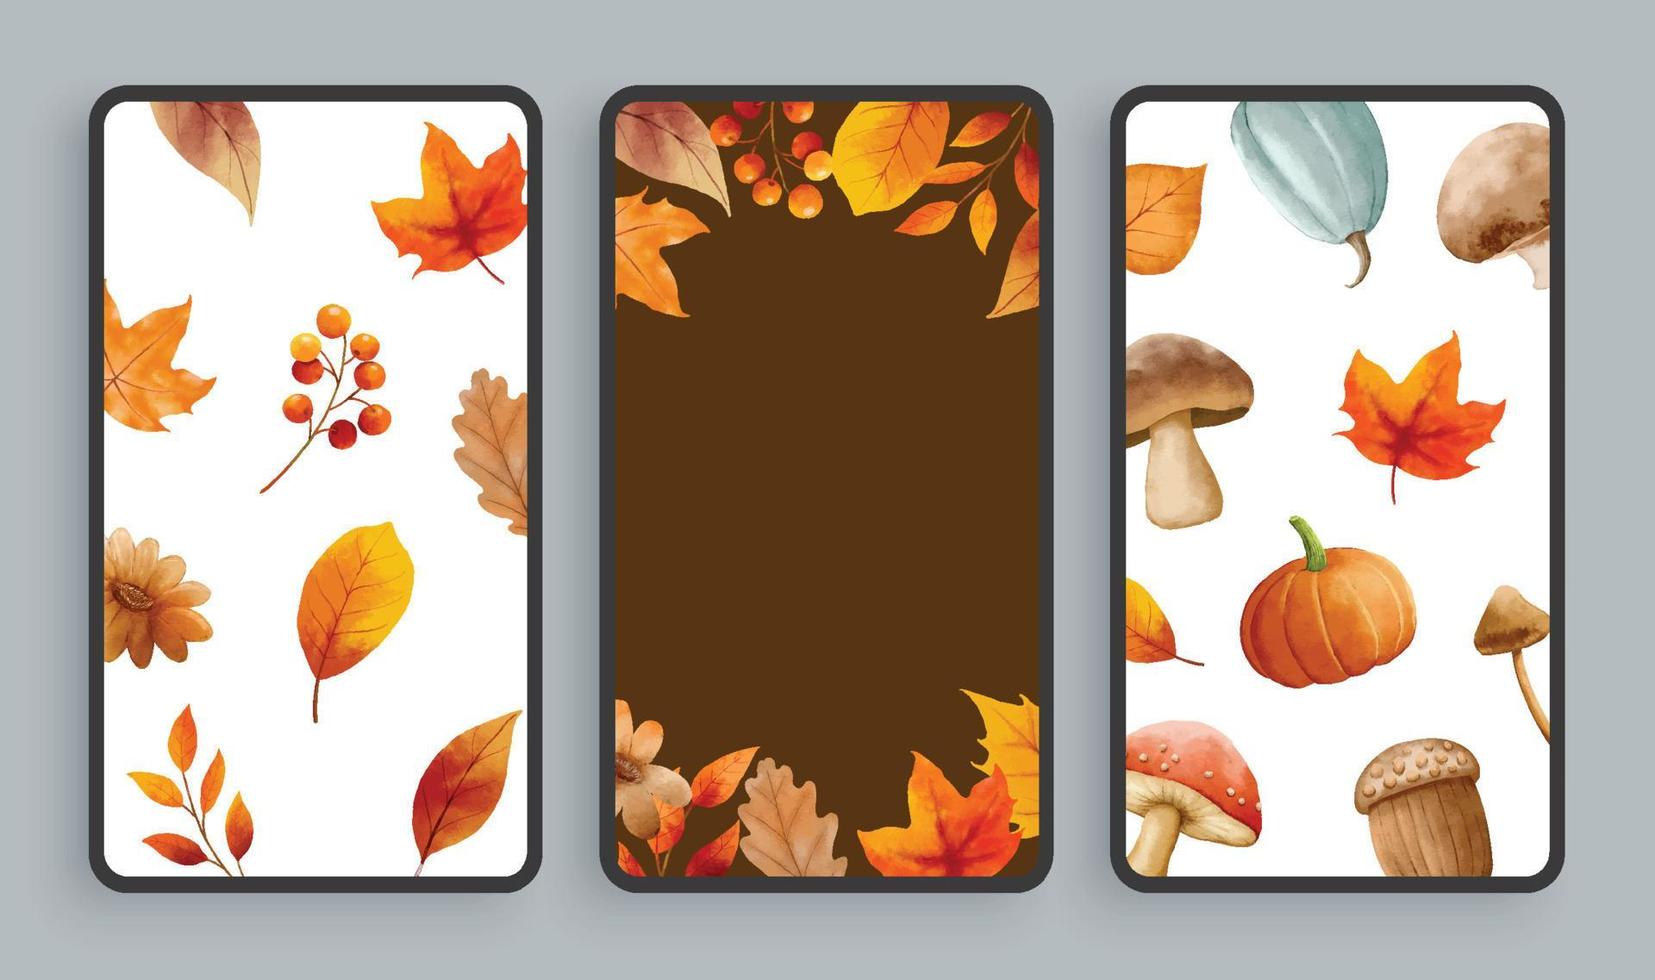 Autumn mobile screen background. Abstract smartphone background template watercolor style. vector